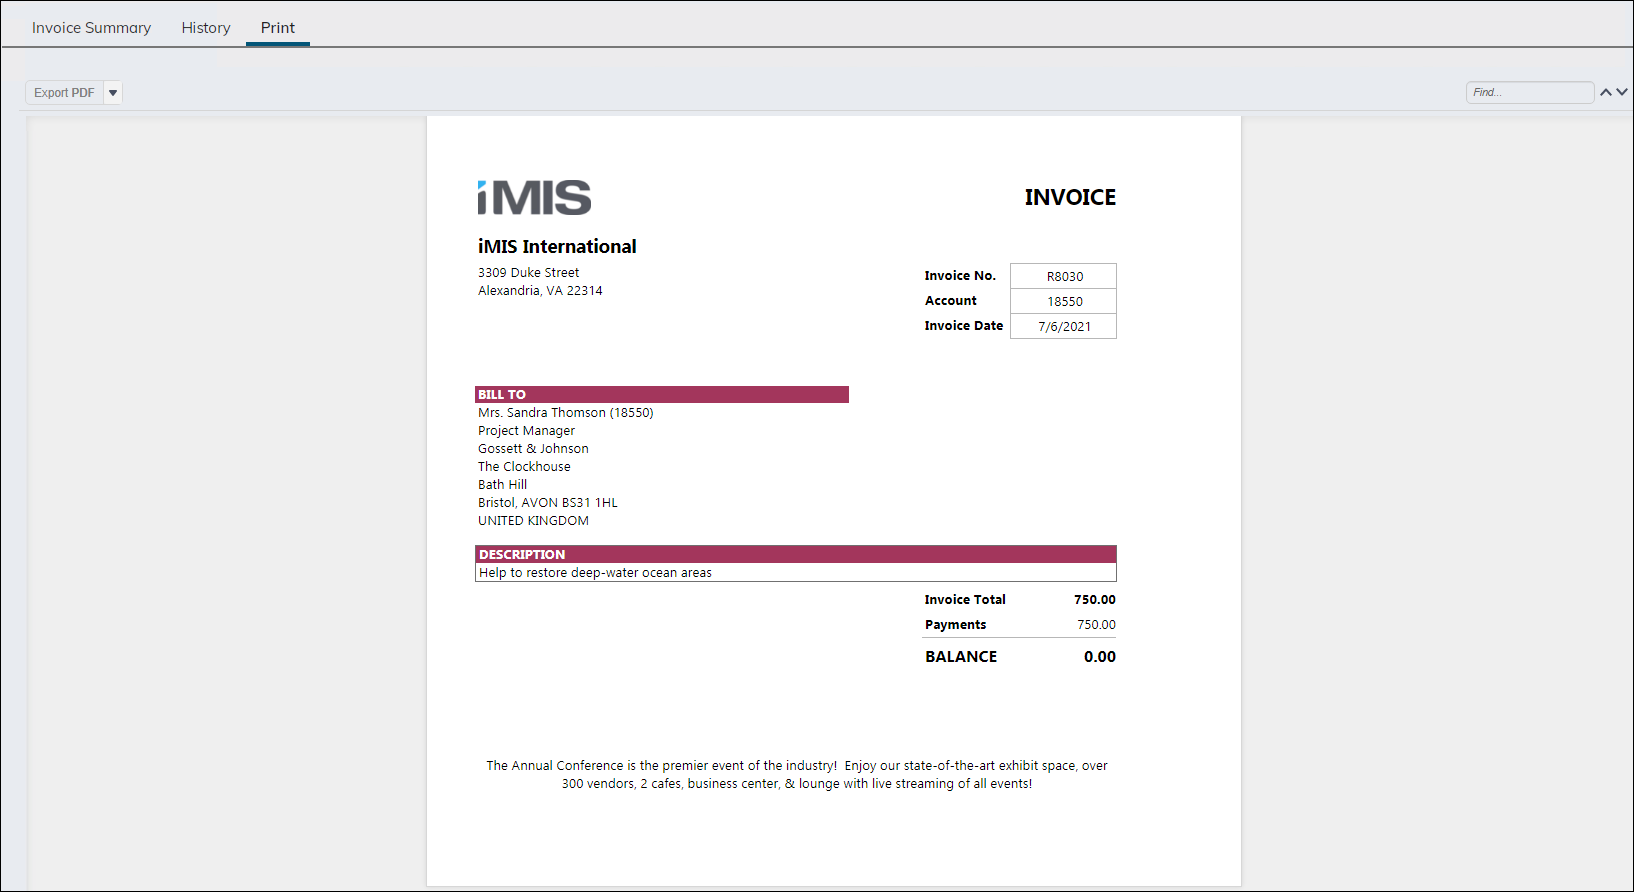 Verifying the invoice